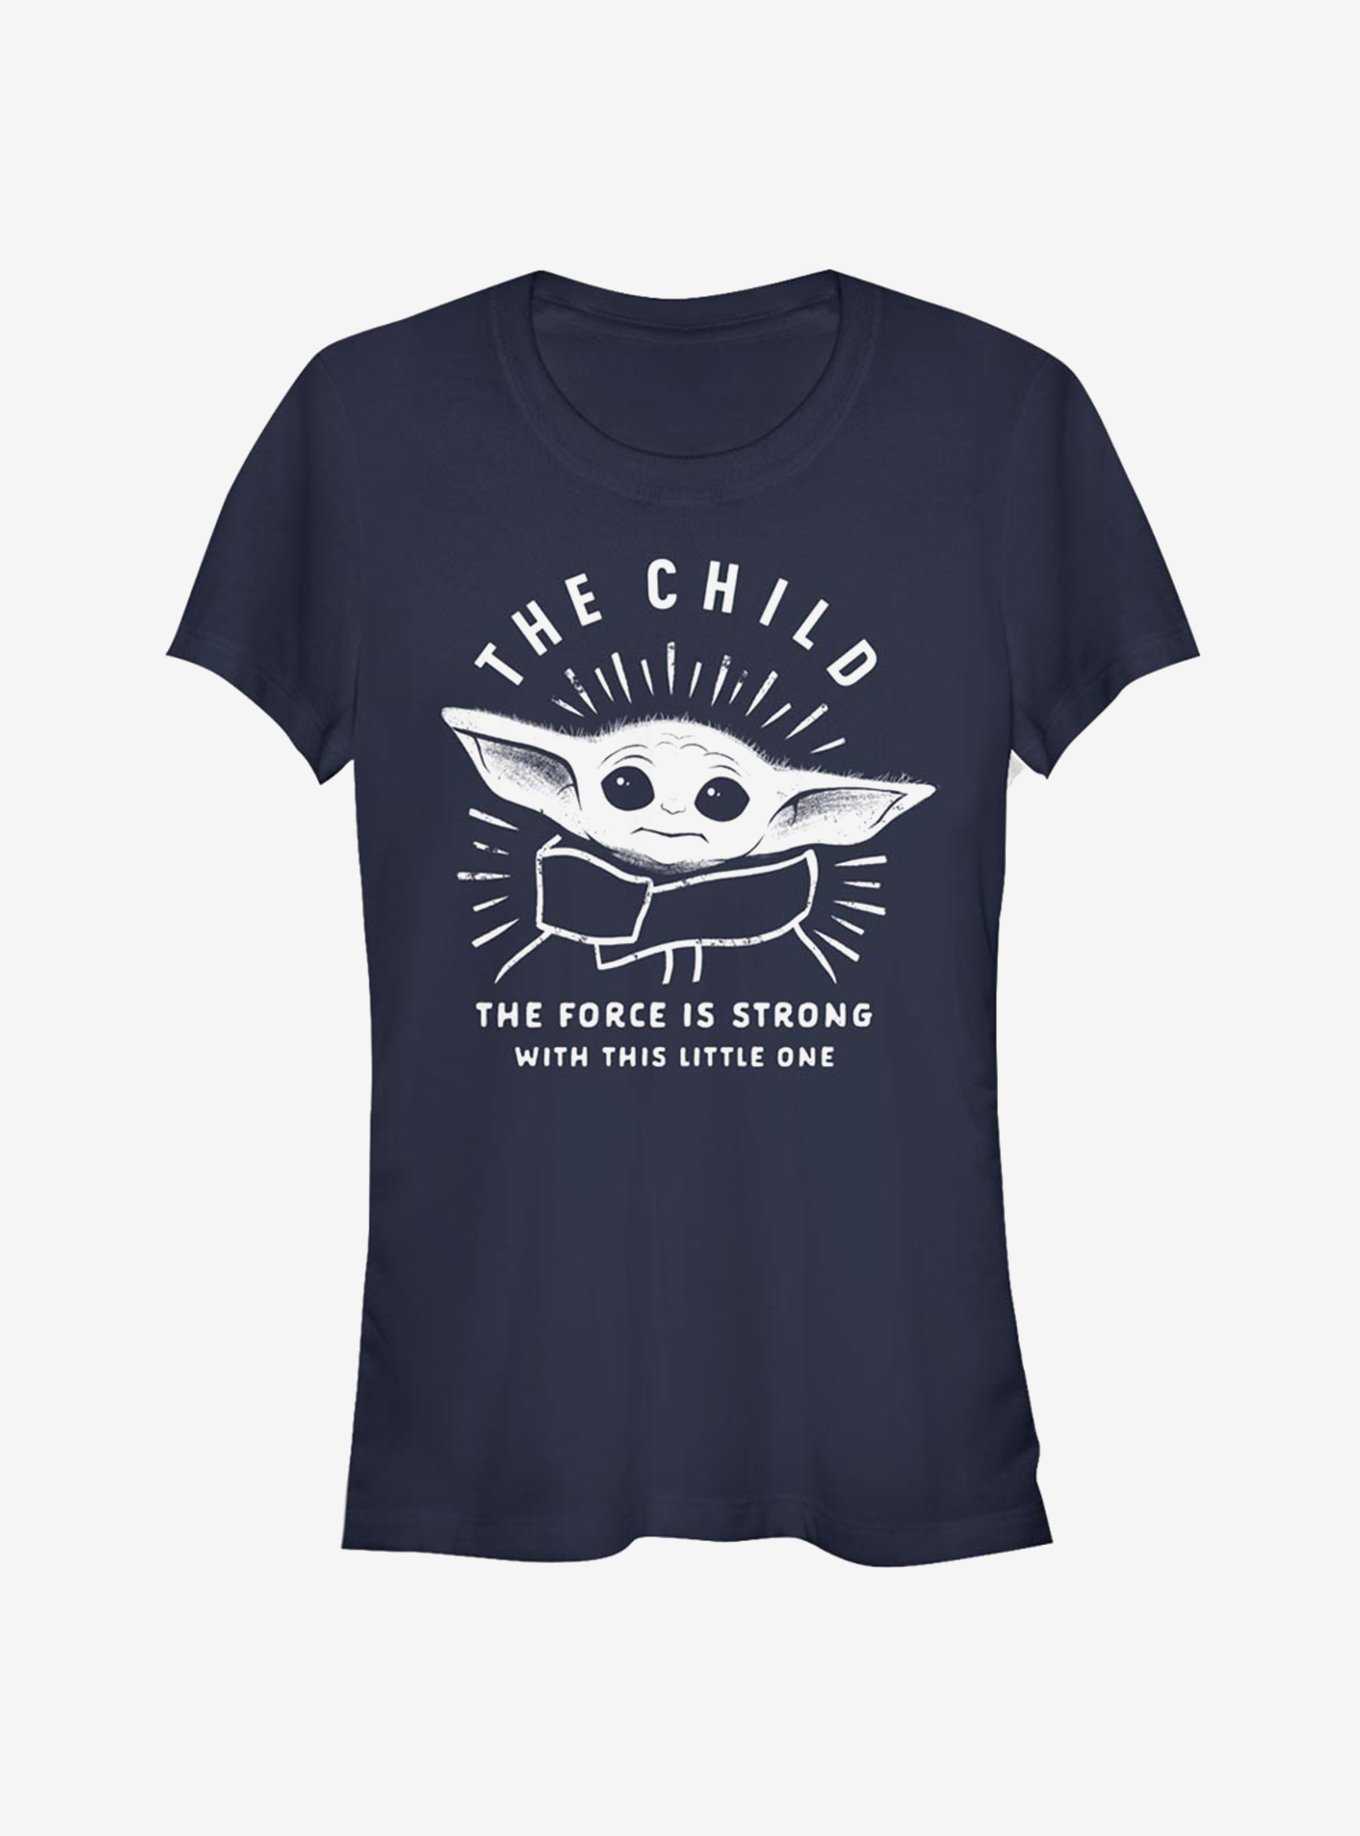 Star Wars The Mandalorian The Child The Force Is Strong Girls T-Shirt, , hi-res